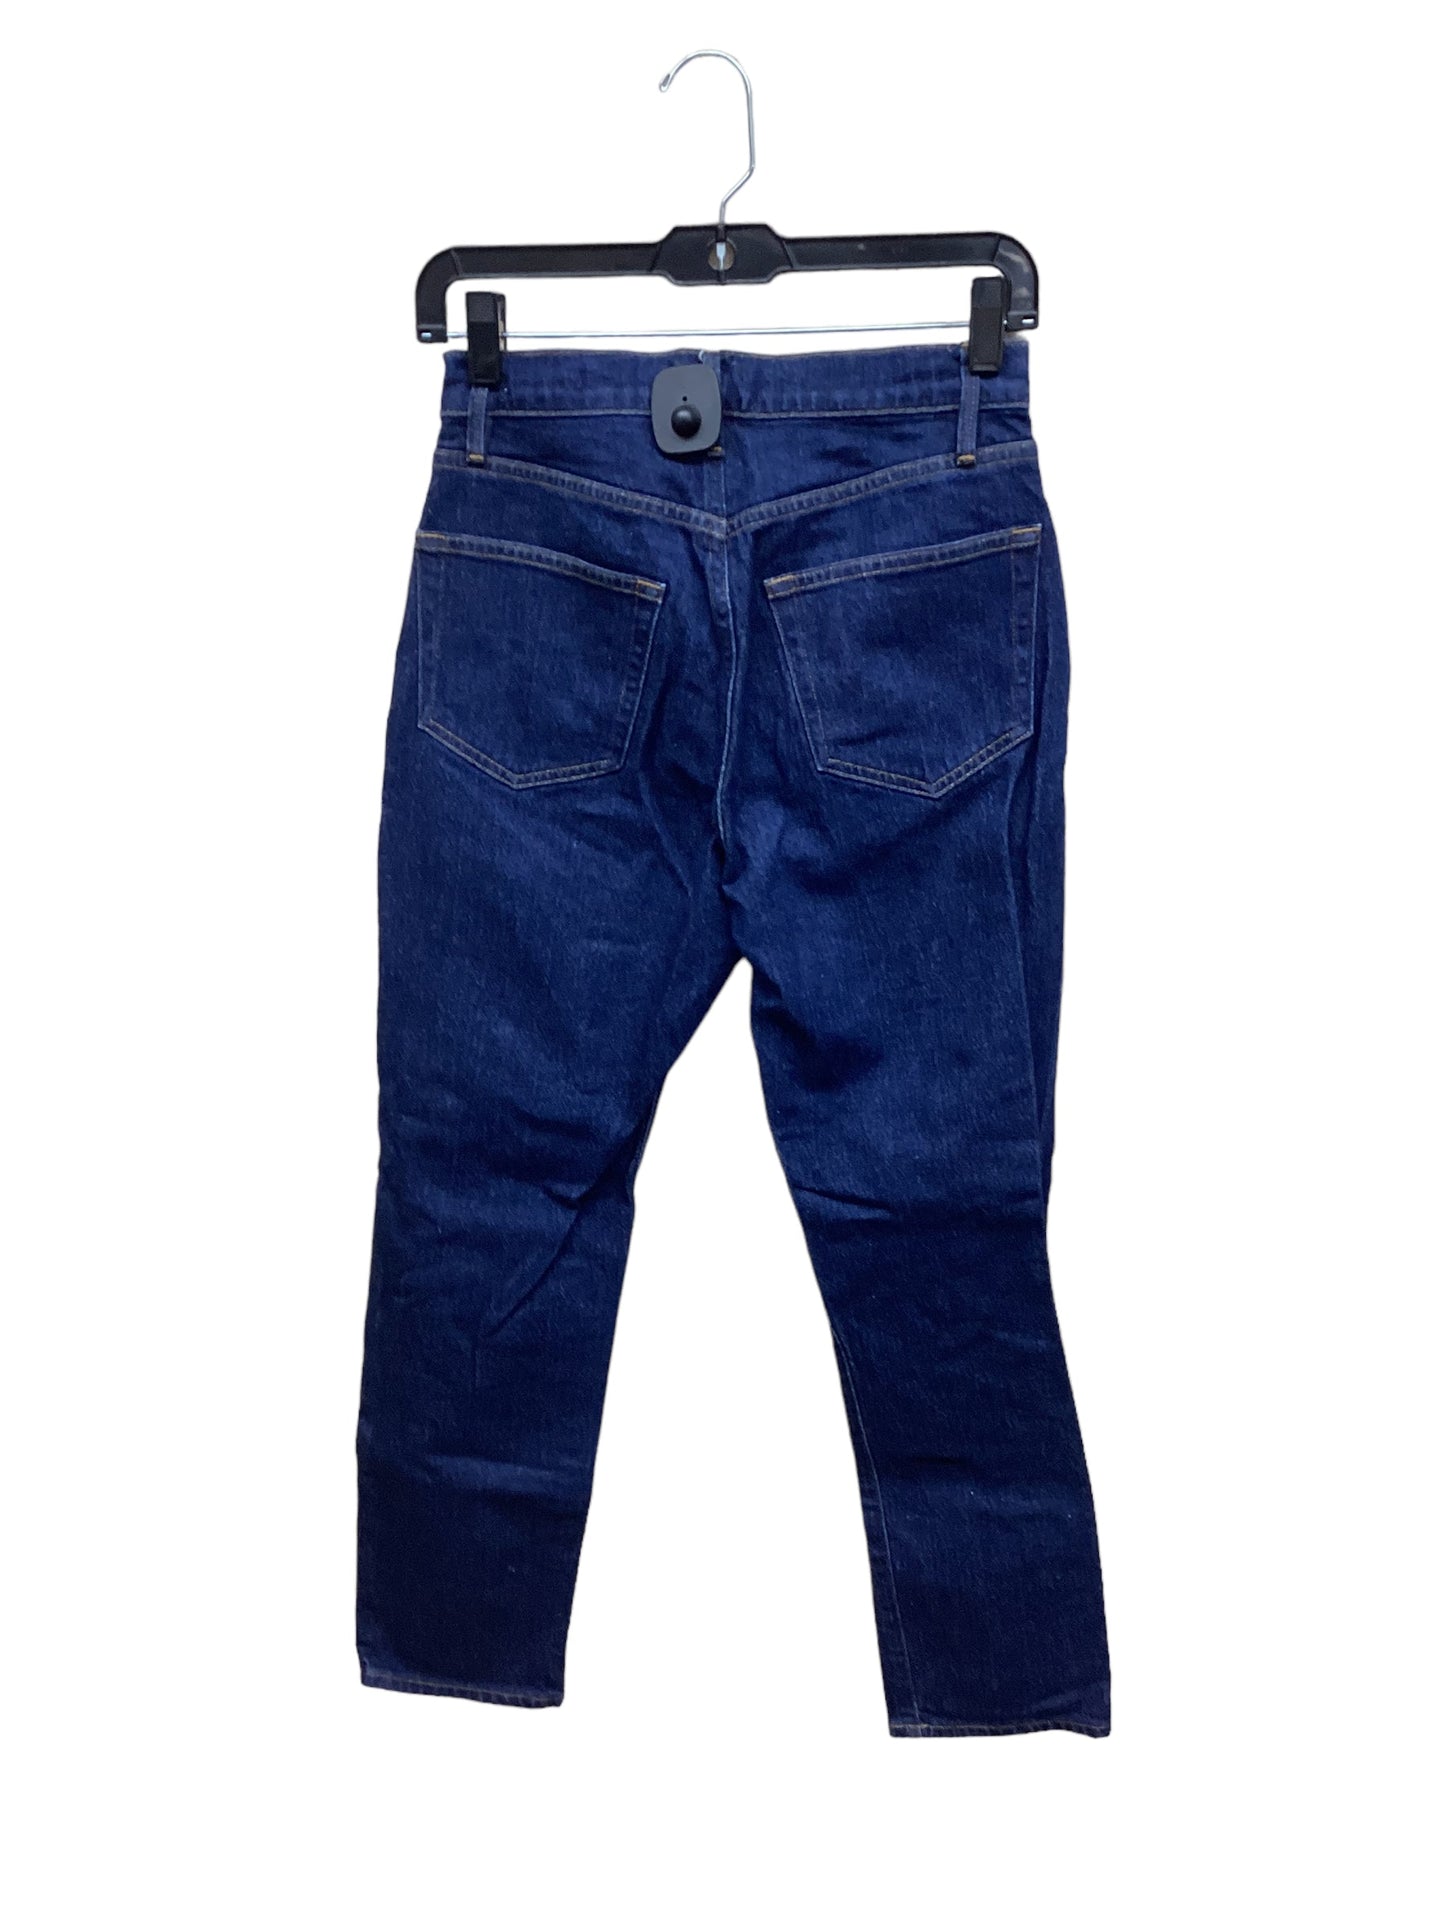 Jeans Straight By Frame  Size: 2